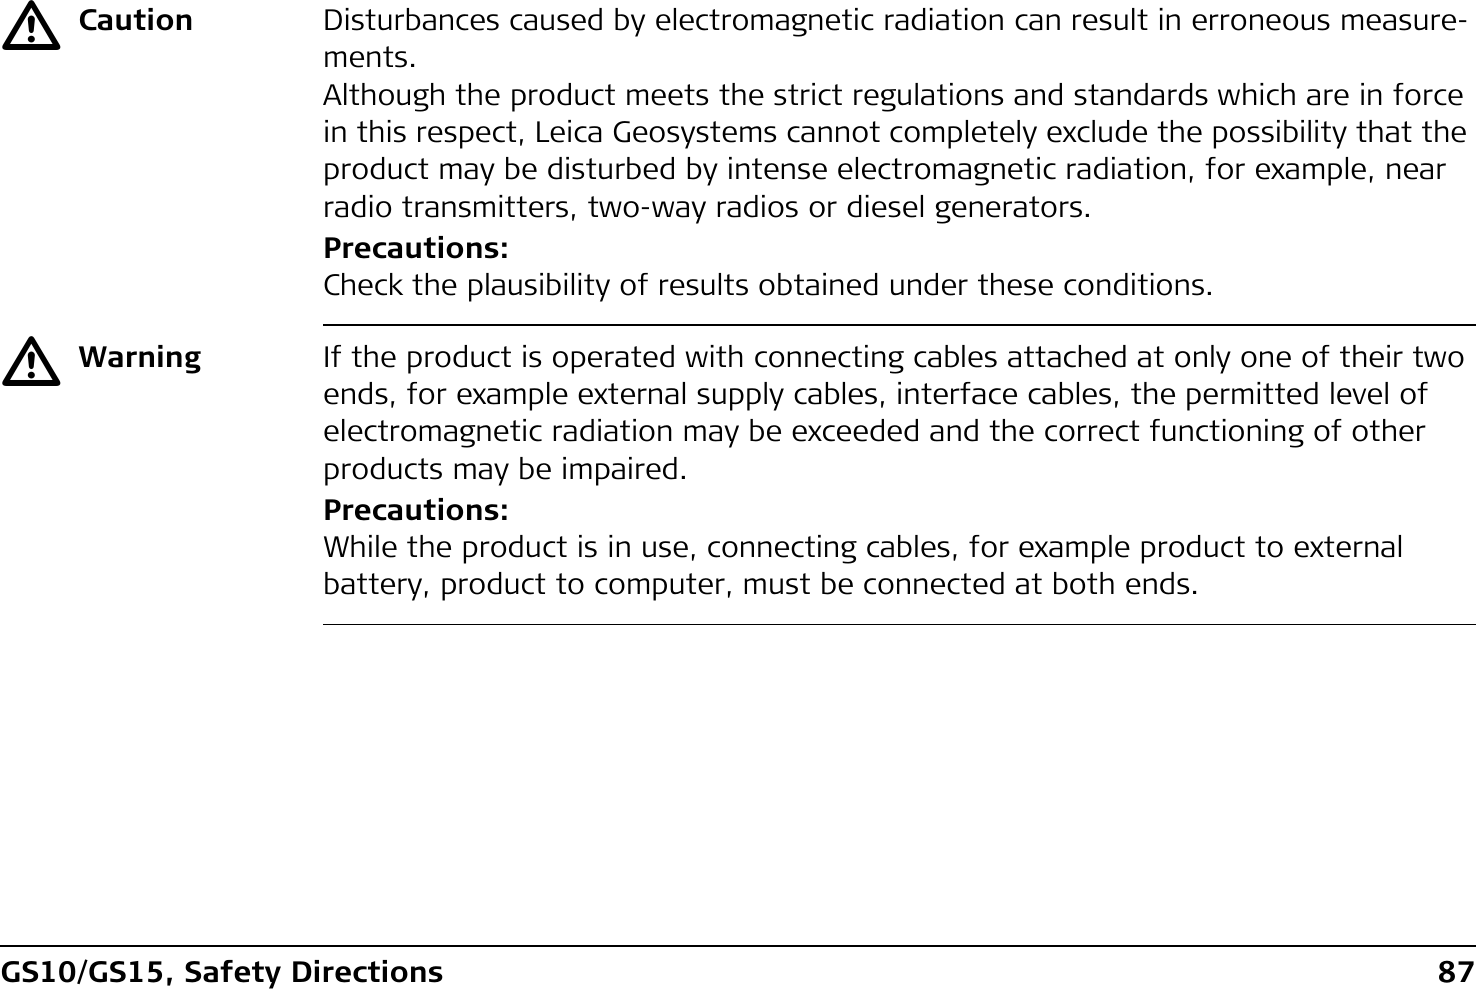 GS10/GS15, Safety Directions 87ƽCaution Disturbances caused by electromagnetic radiation can result in erroneous measure-ments.Although the product meets the strict regulations and standards which are in force in this respect, Leica Geosystems cannot completely exclude the possibility that the product may be disturbed by intense electromagnetic radiation, for example, near radio transmitters, two-way radios or diesel generators.Precautions:Check the plausibility of results obtained under these conditions.ƽWarning If the product is operated with connecting cables attached at only one of their two ends, for example external supply cables, interface cables, the permitted level of electromagnetic radiation may be exceeded and the correct functioning of other products may be impaired. Precautions:While the product is in use, connecting cables, for example product to external battery, product to computer, must be connected at both ends.